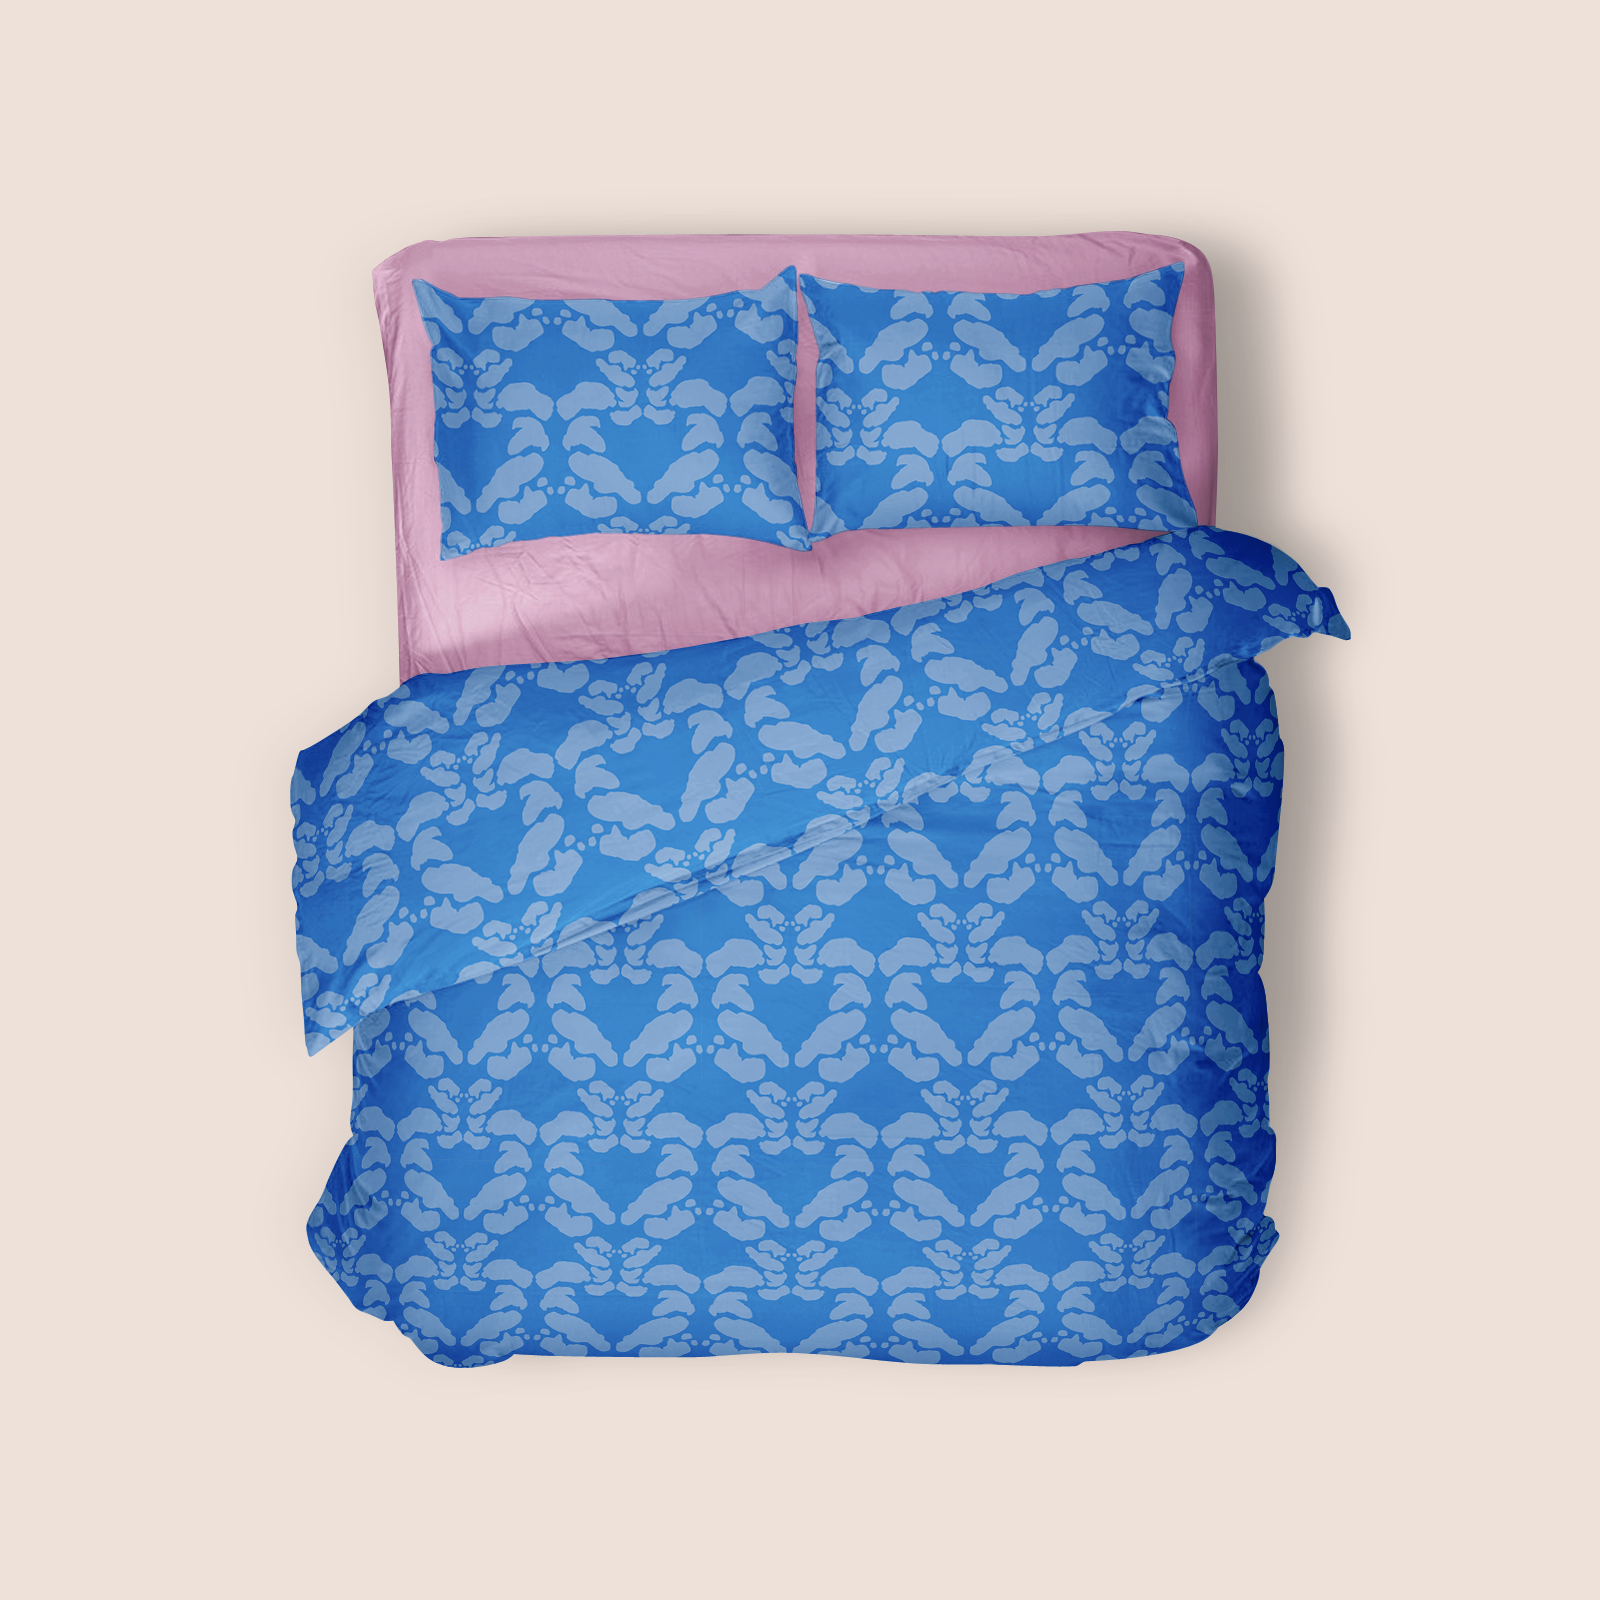 Symmetry décor in blue on blue pattern design printed on recycled fabric canvas